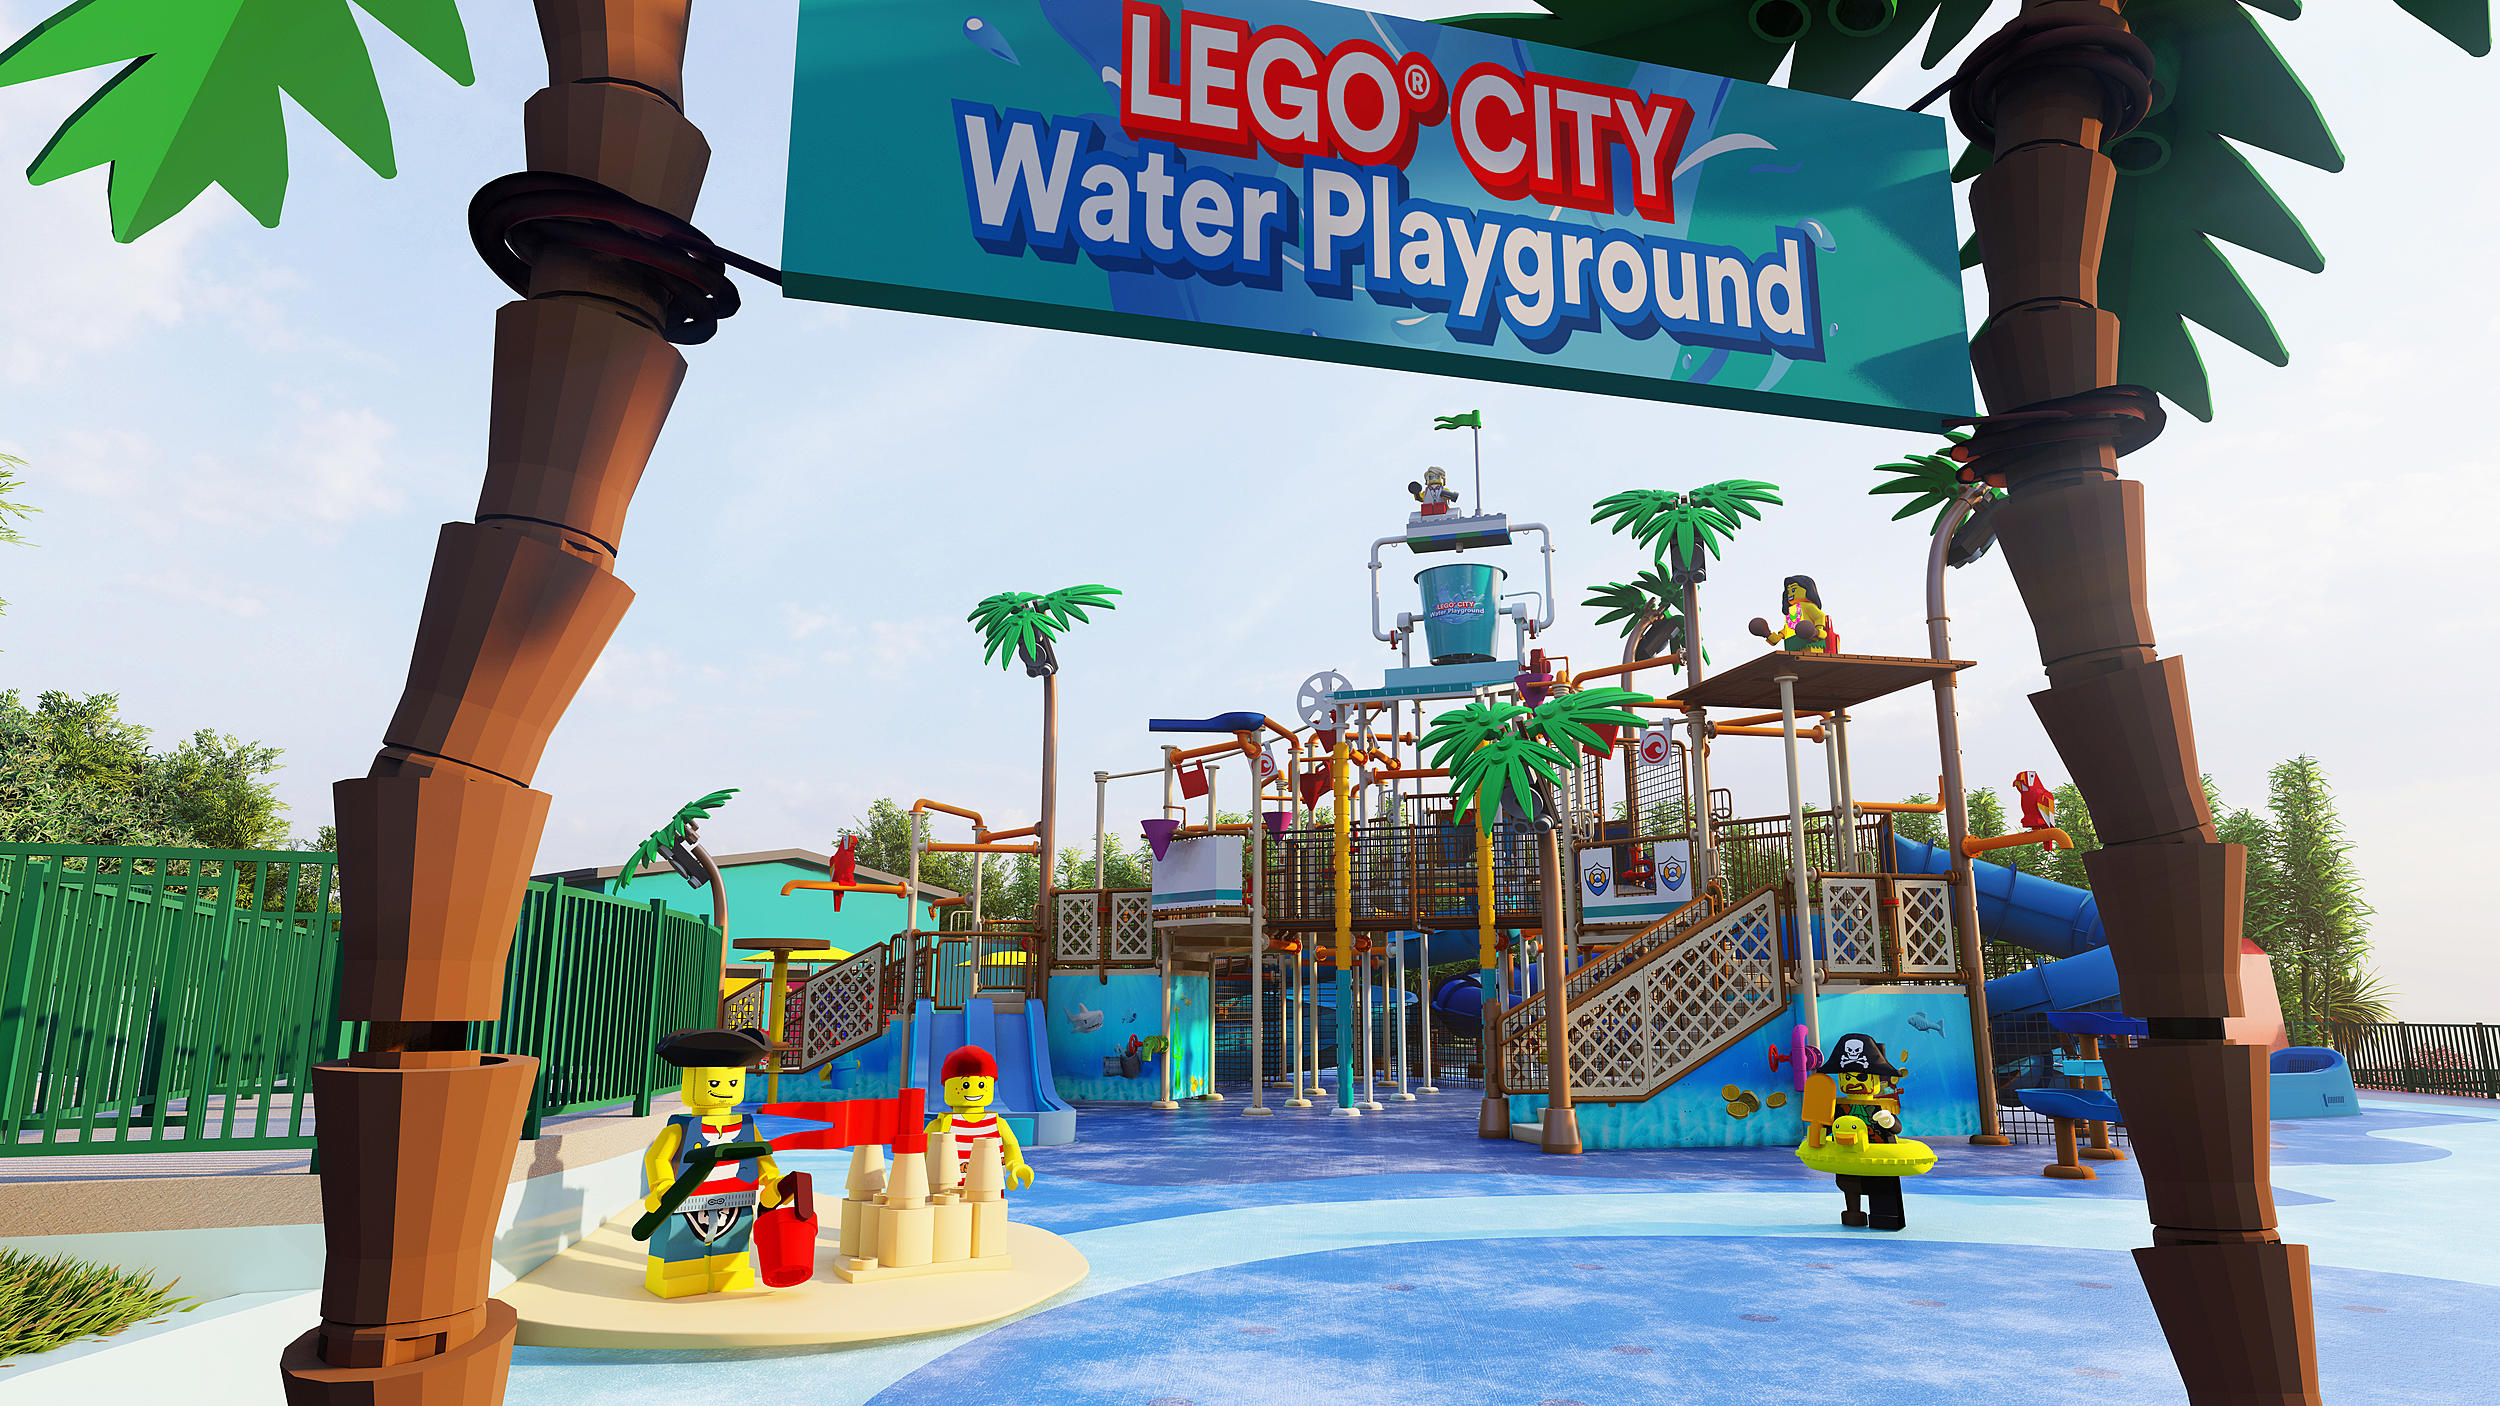 Take A Peek At LEGOLAND NY's New Water Playground Before It Opens